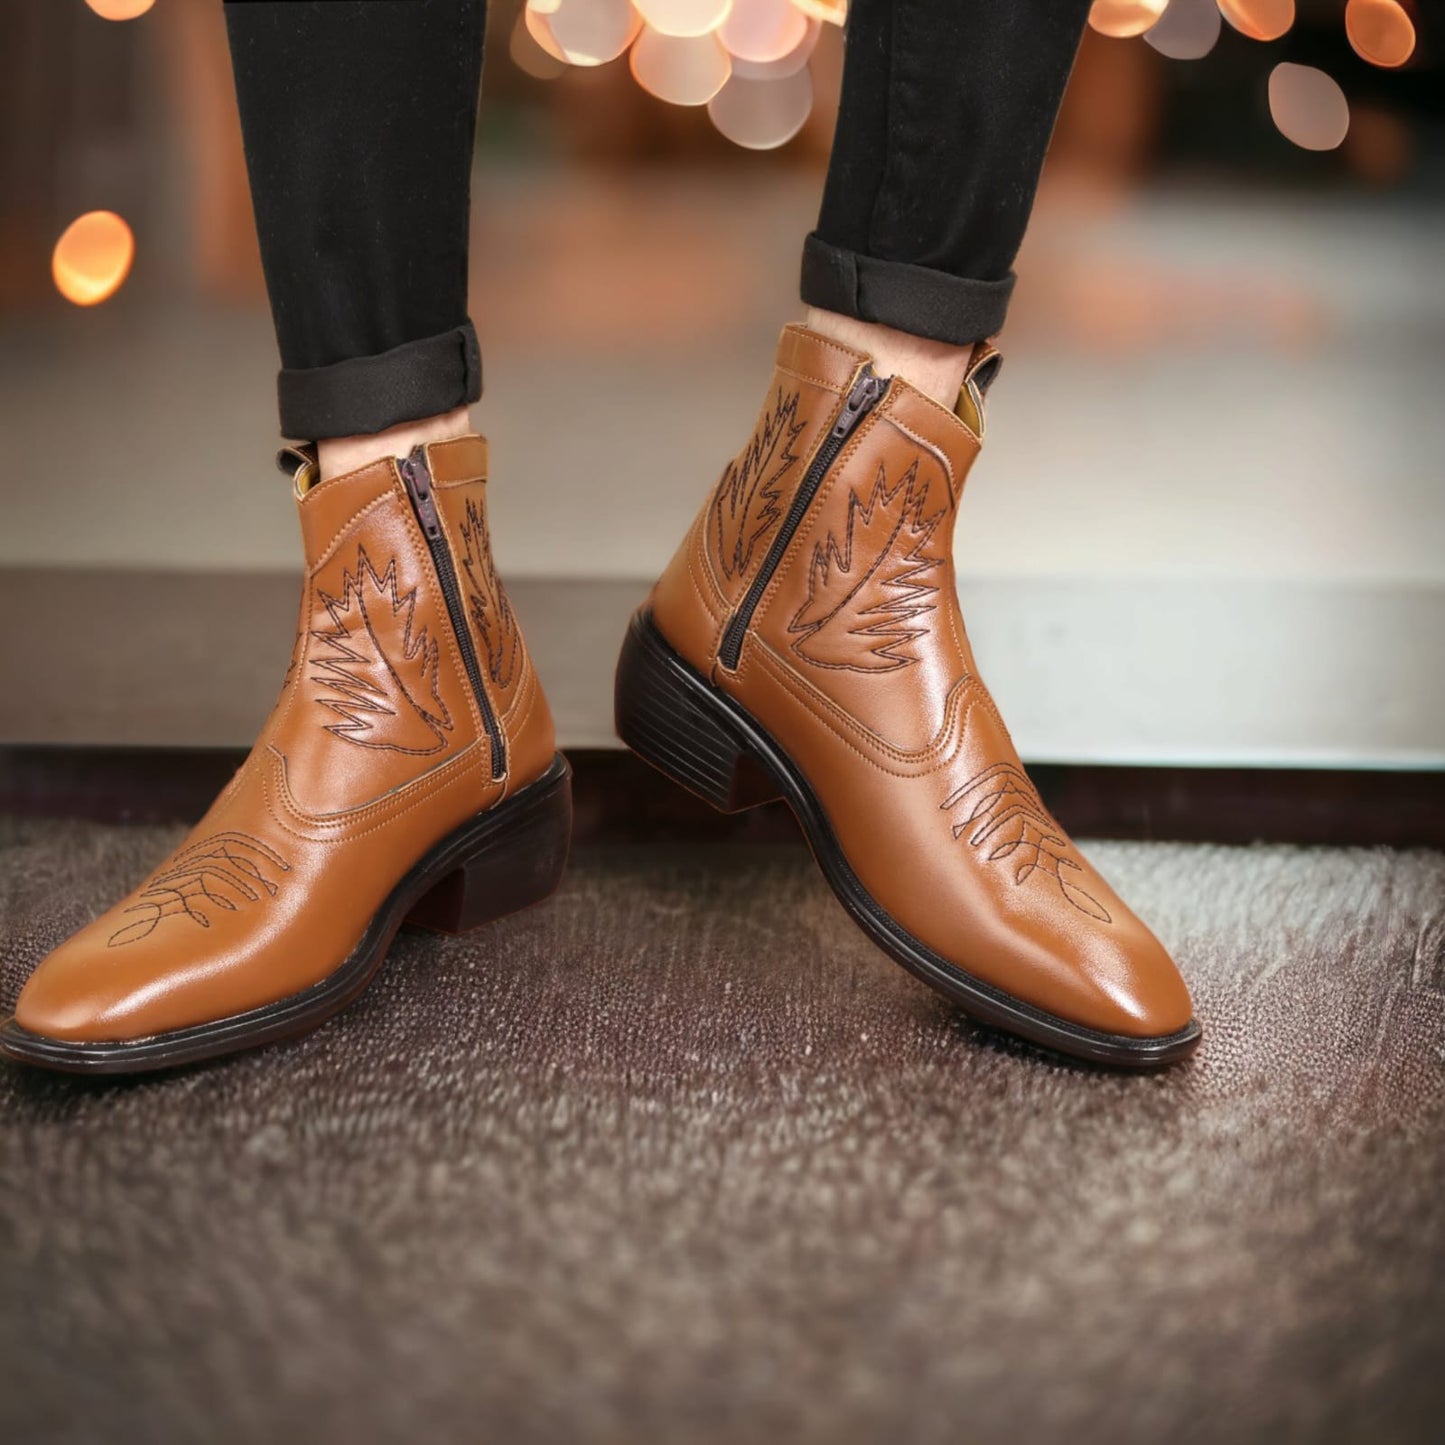 Jack Marc Men's Tan Color Formal And Casual Retro Boots